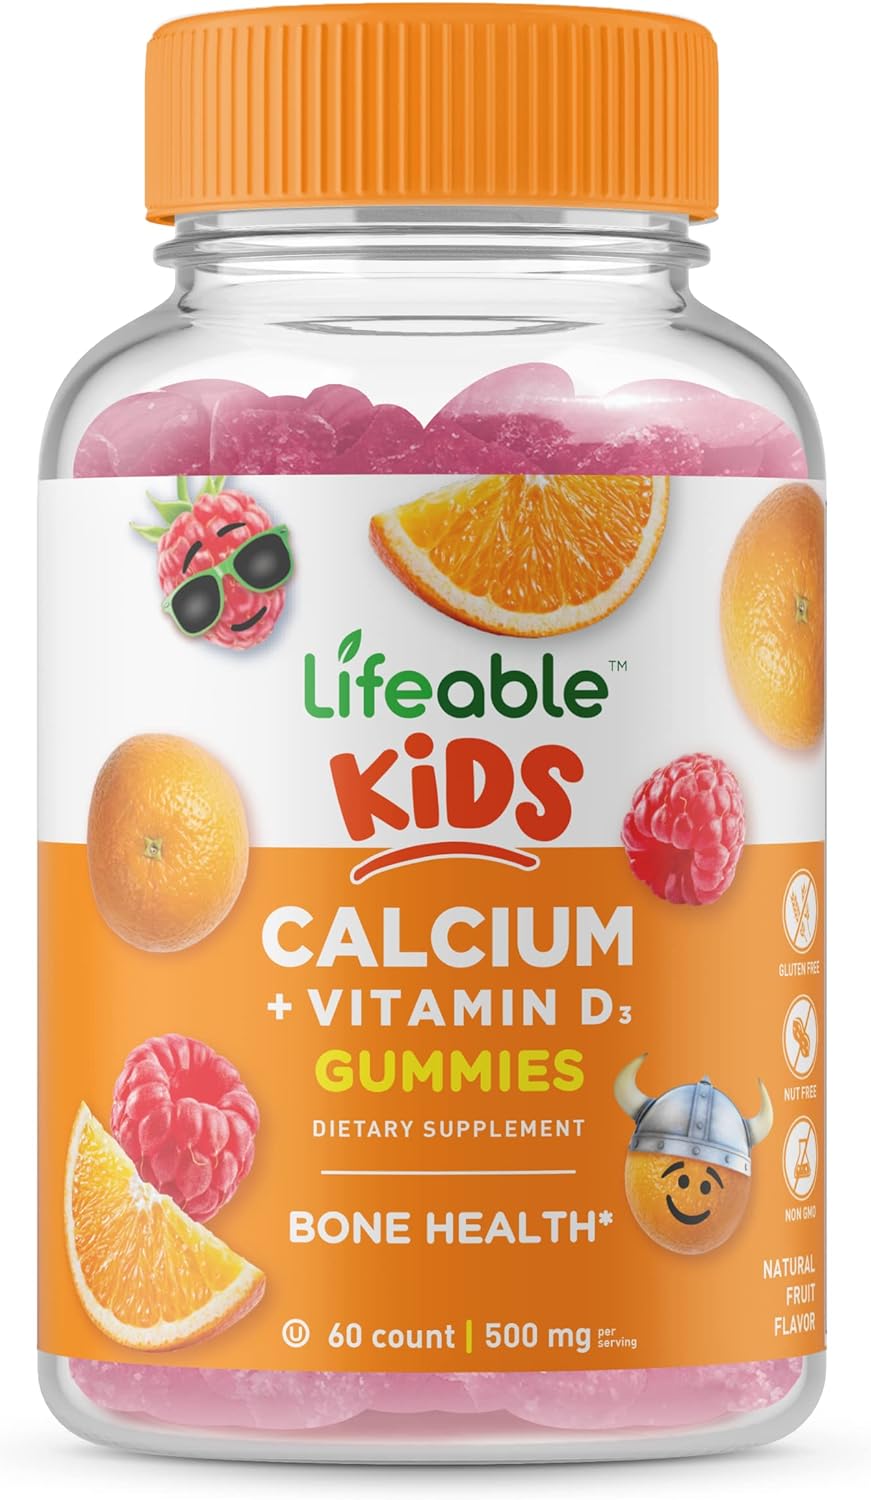 Lifeable Calcium 500 mg with Vitamin D3 1000 IU Gummies for Kids - Natural Flavor Vitamin Supplements - Gluten Free GMO-Free Chewable - for Bone, Groth, Teeth - for Children - 60 Gummies